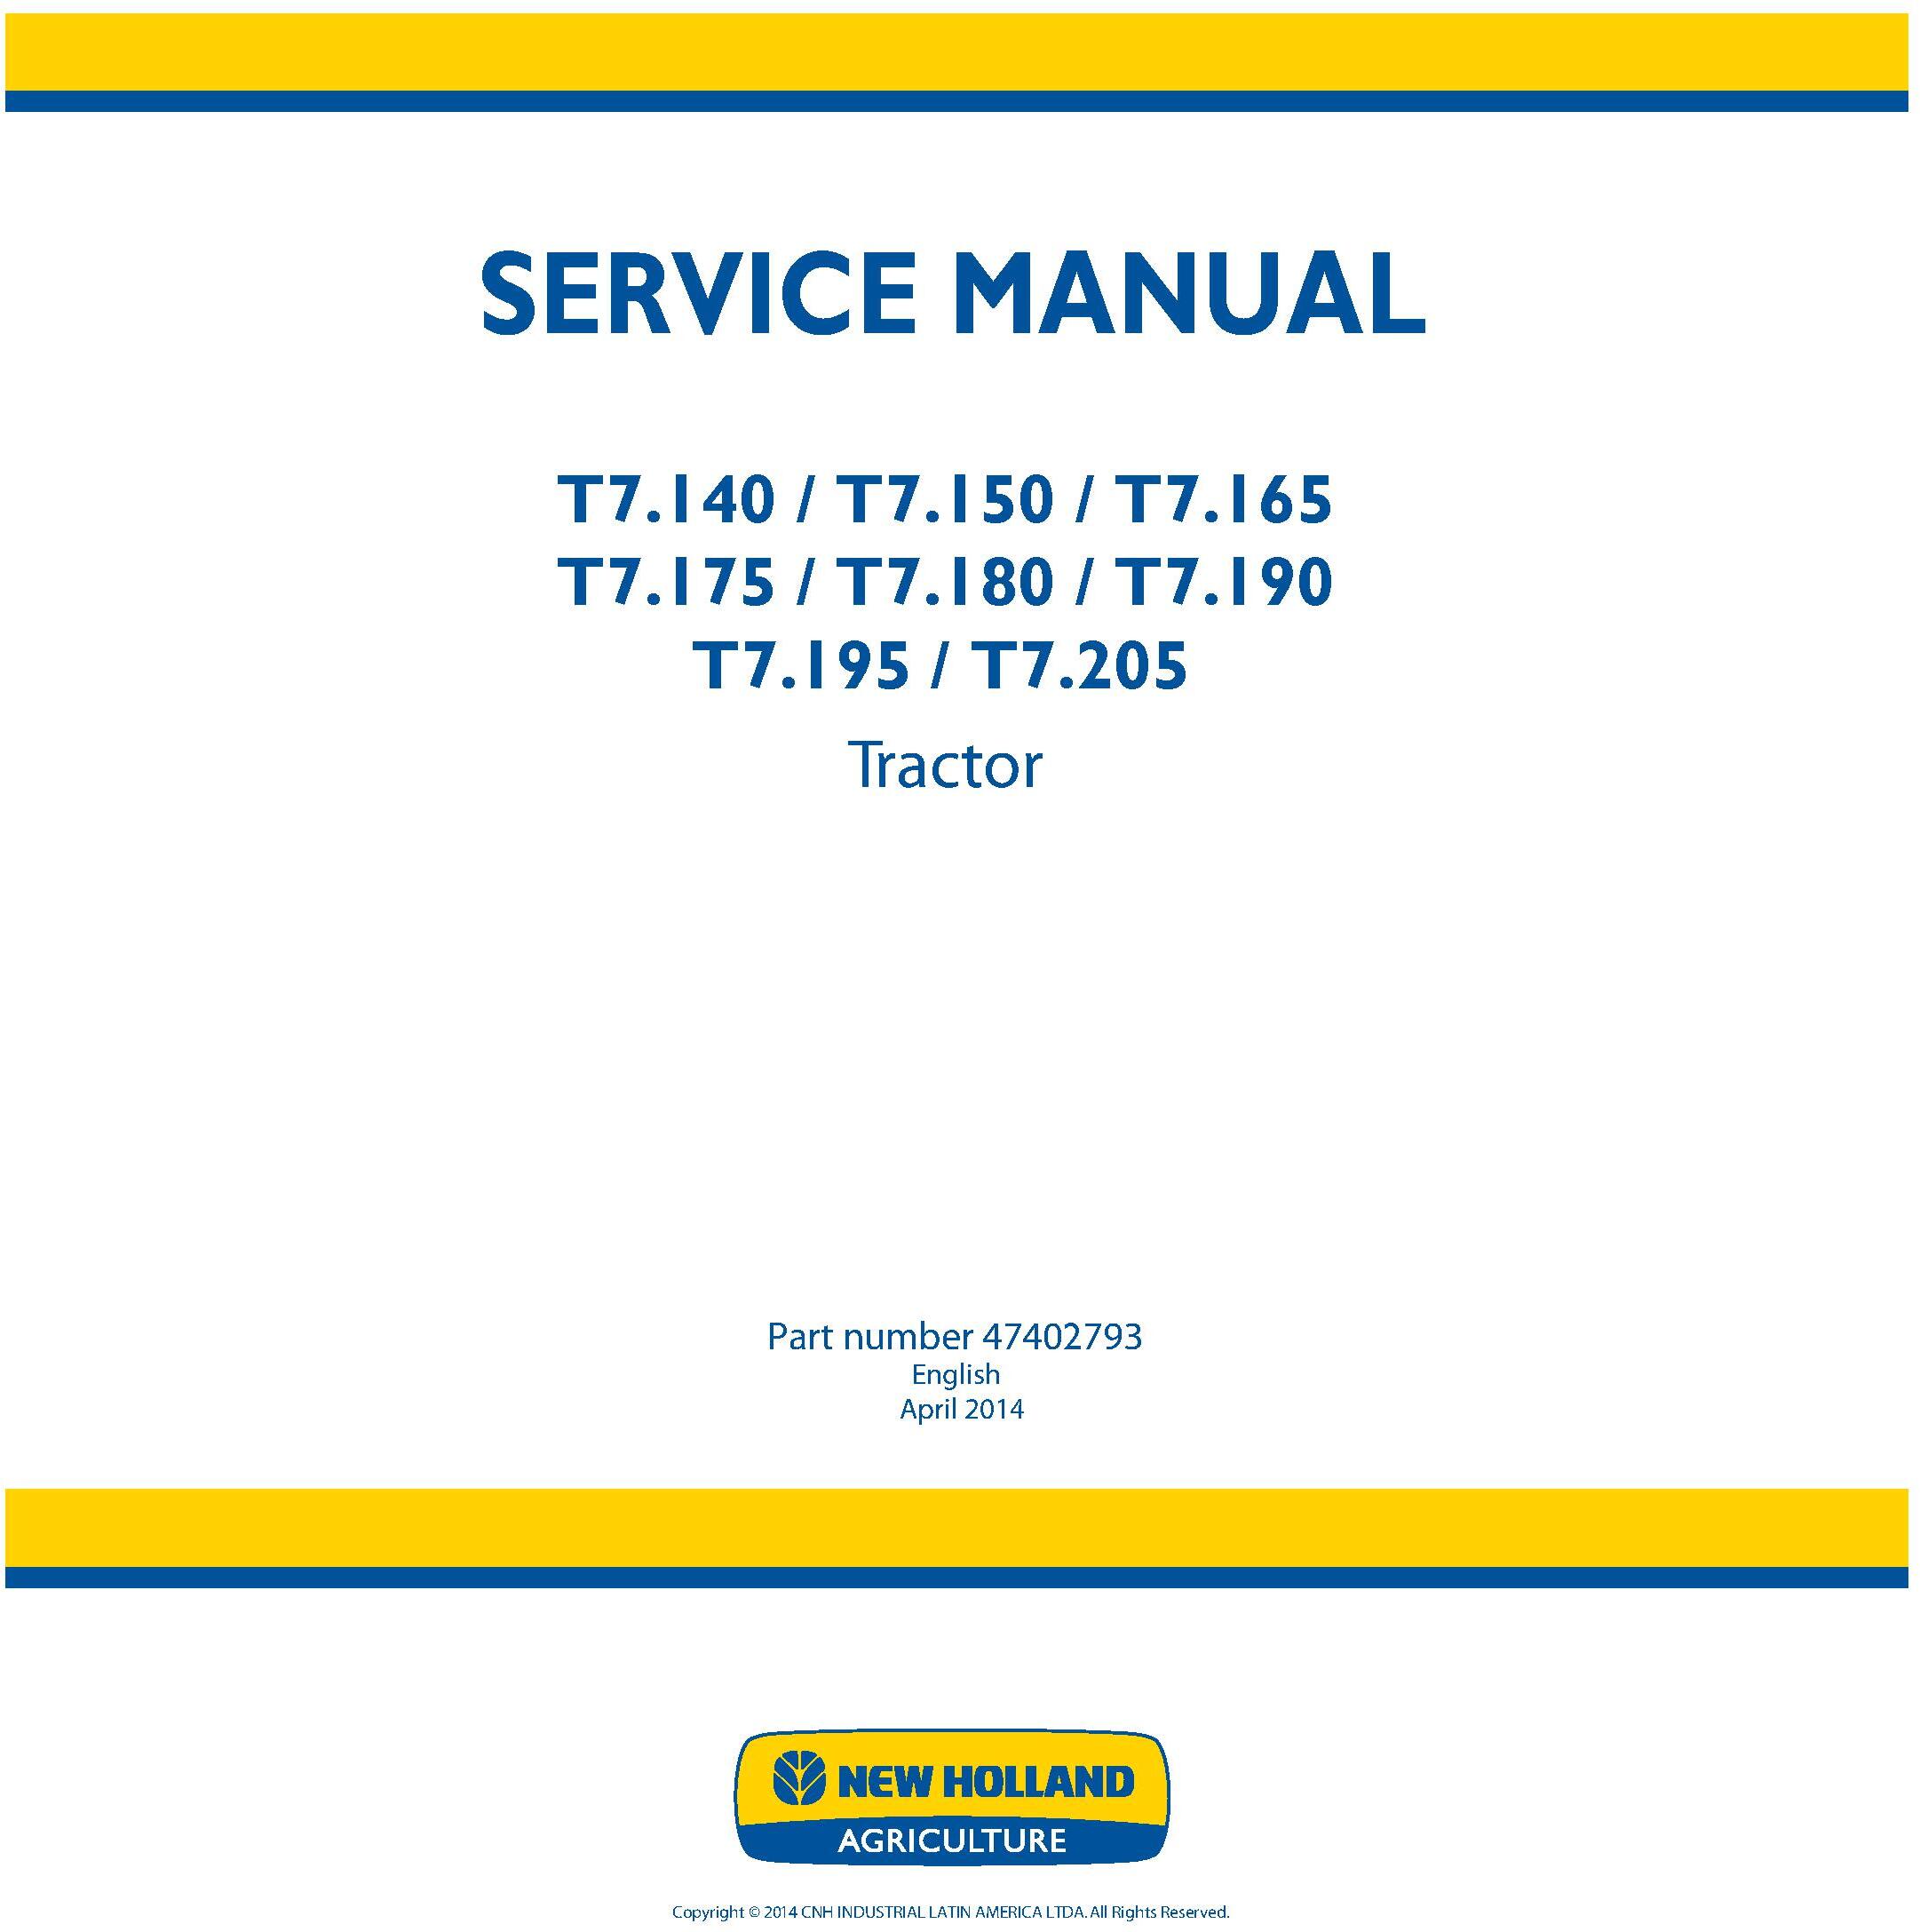 New Holland T7.140, T7.150, T7.165, T7.175, T7.180, T7.190, T7.195, T7.205 Tractor Service Manual - 19377